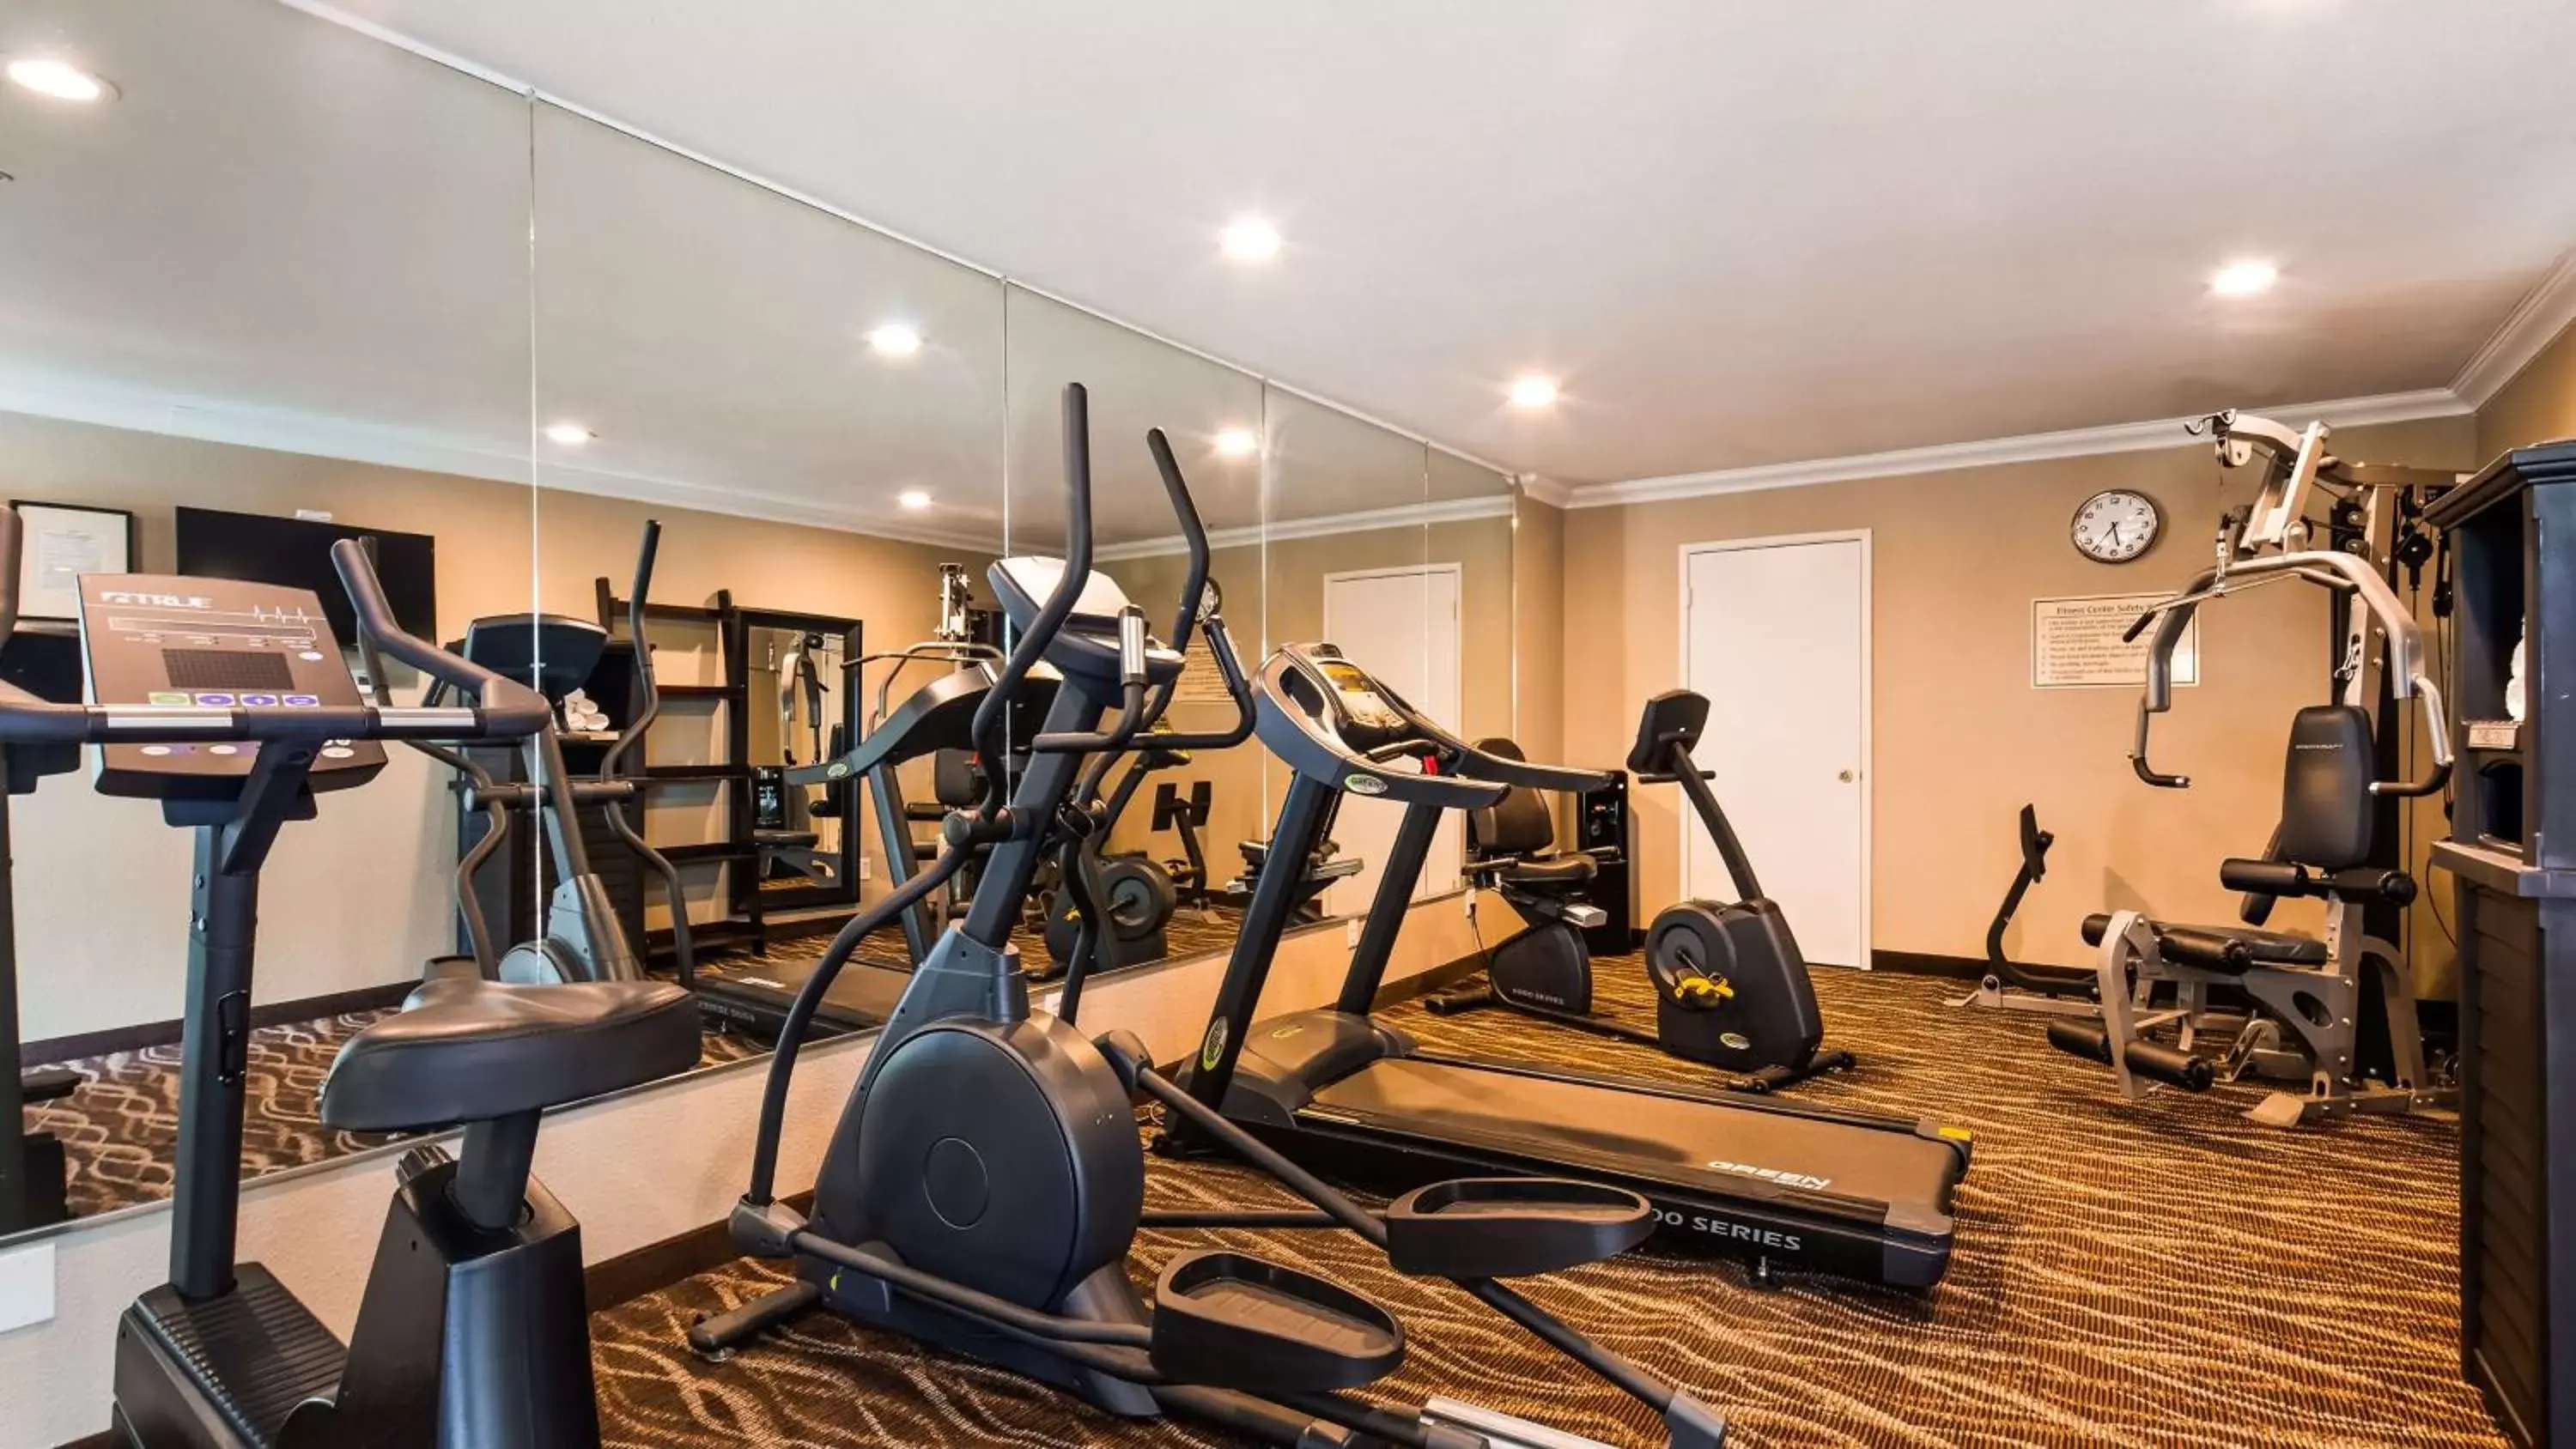 Fitness centre/facilities, Fitness Center/Facilities in Best Western Willows Inn